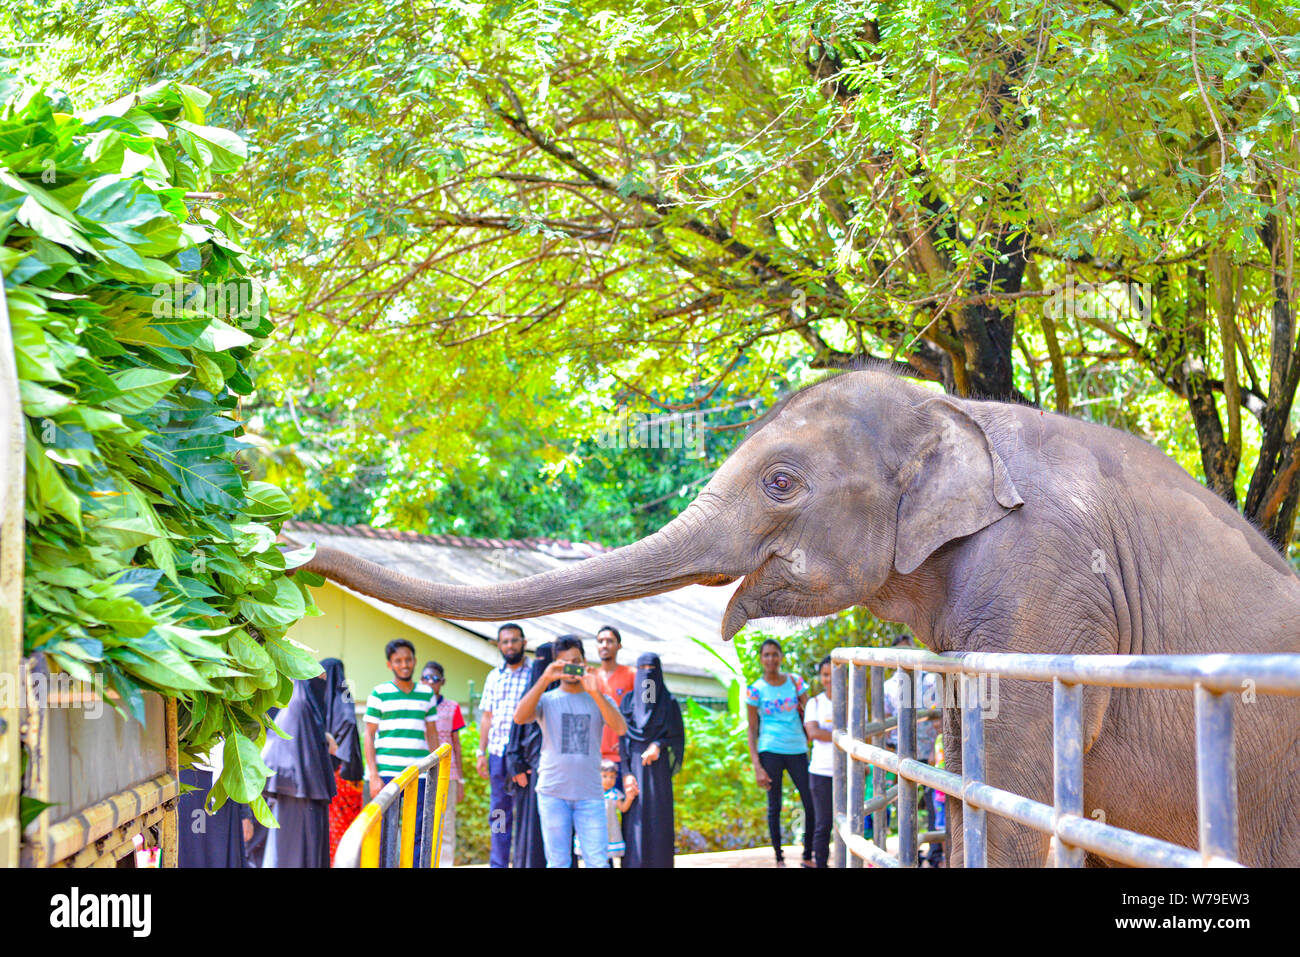 Mawanella, Sri Lanka - July 9, 2016:  Elephant feeding on fresh leaves brought by truck with visitors on the background. Stock Photo